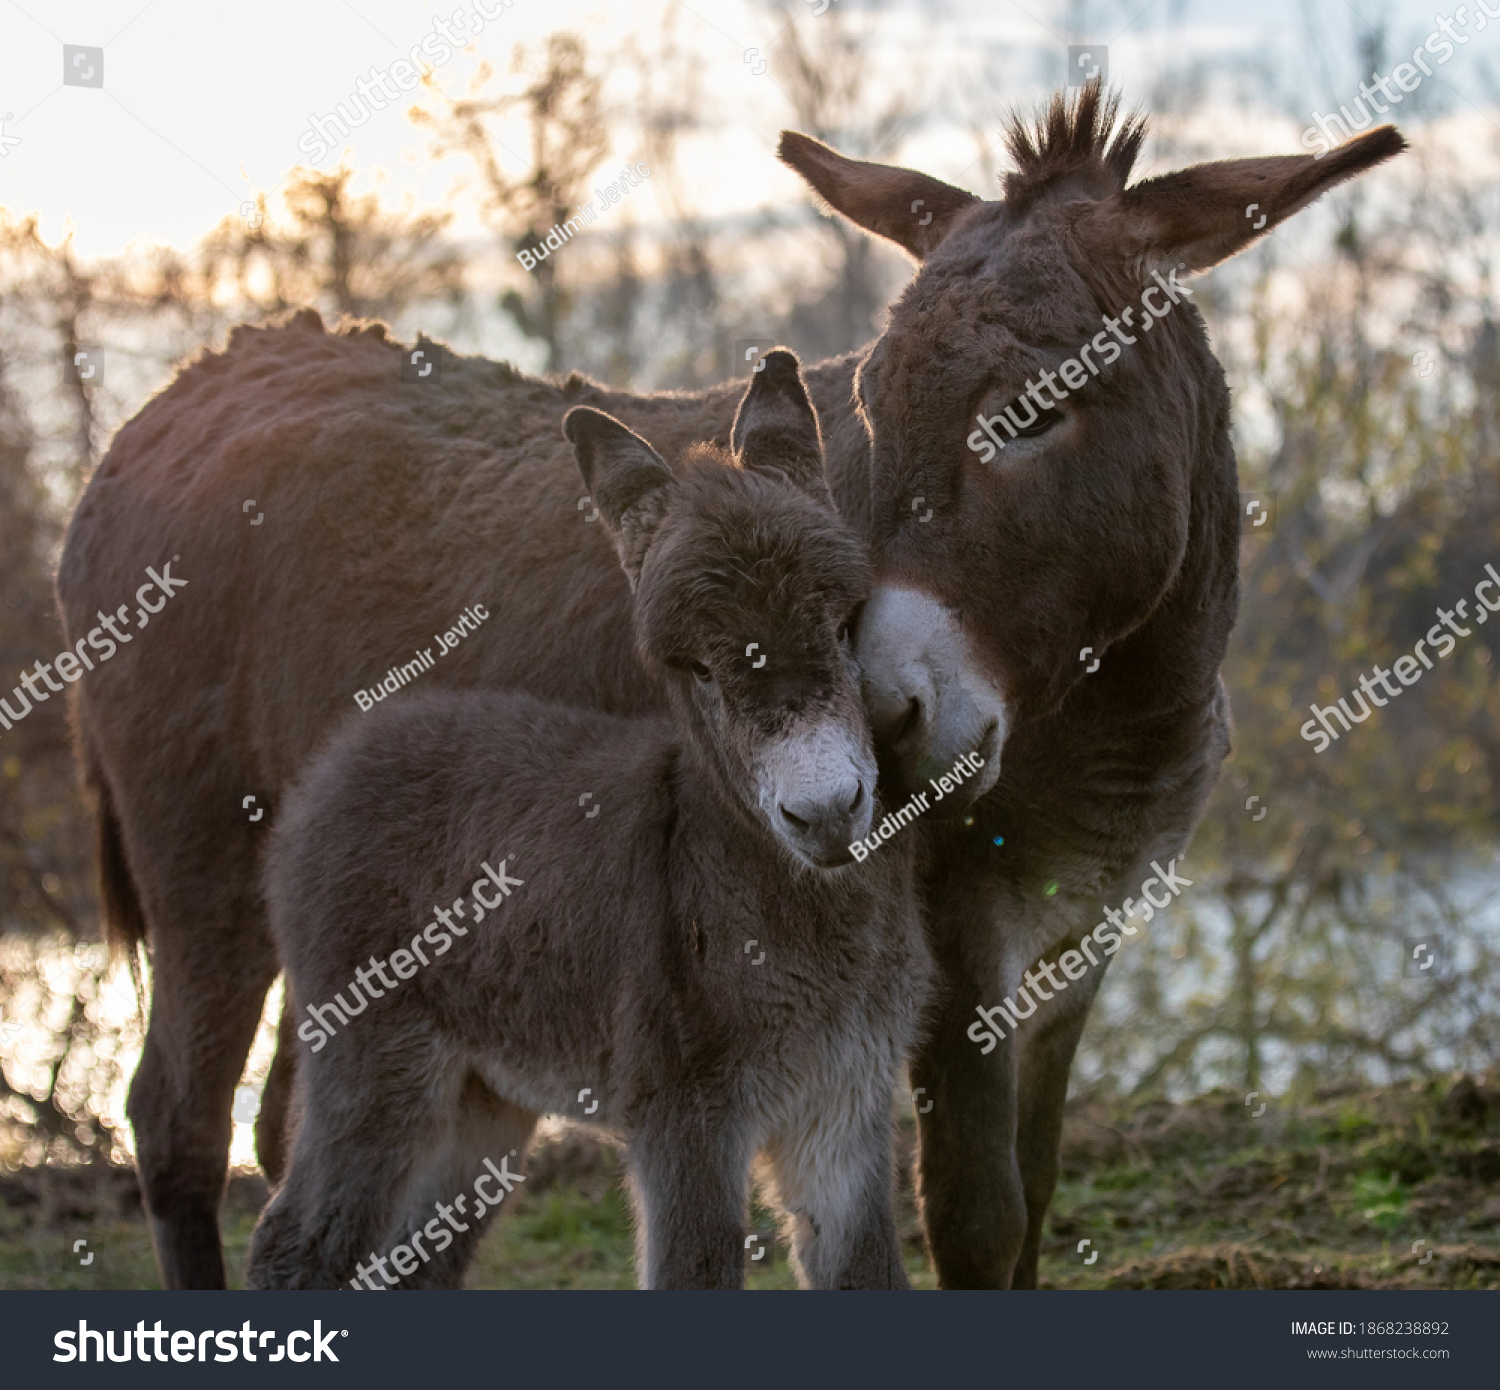 Tender moments of mother donkey peting her colt in forest #1868238892